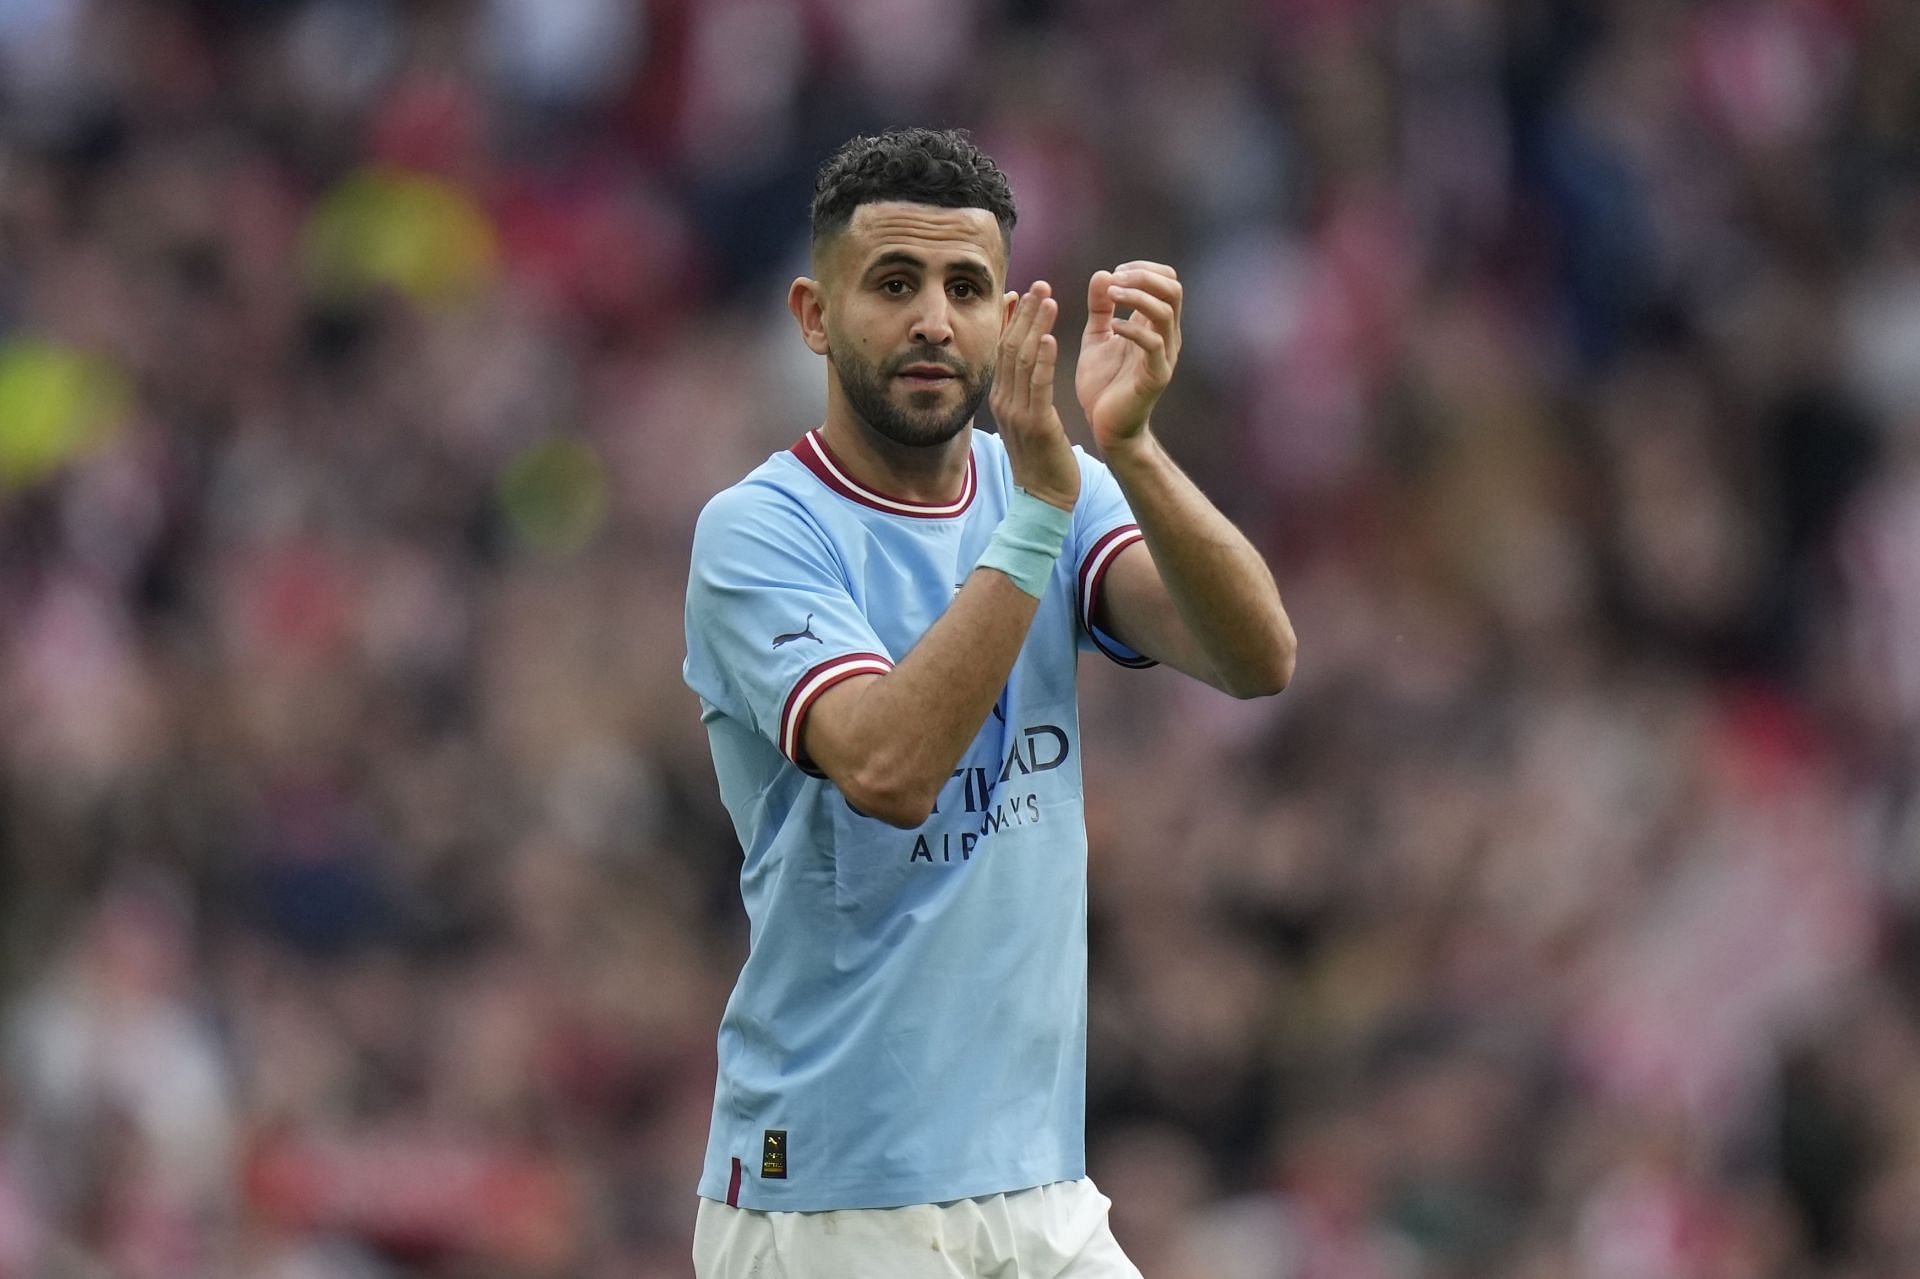 Riyad Mahrez was excellent for Manchester City